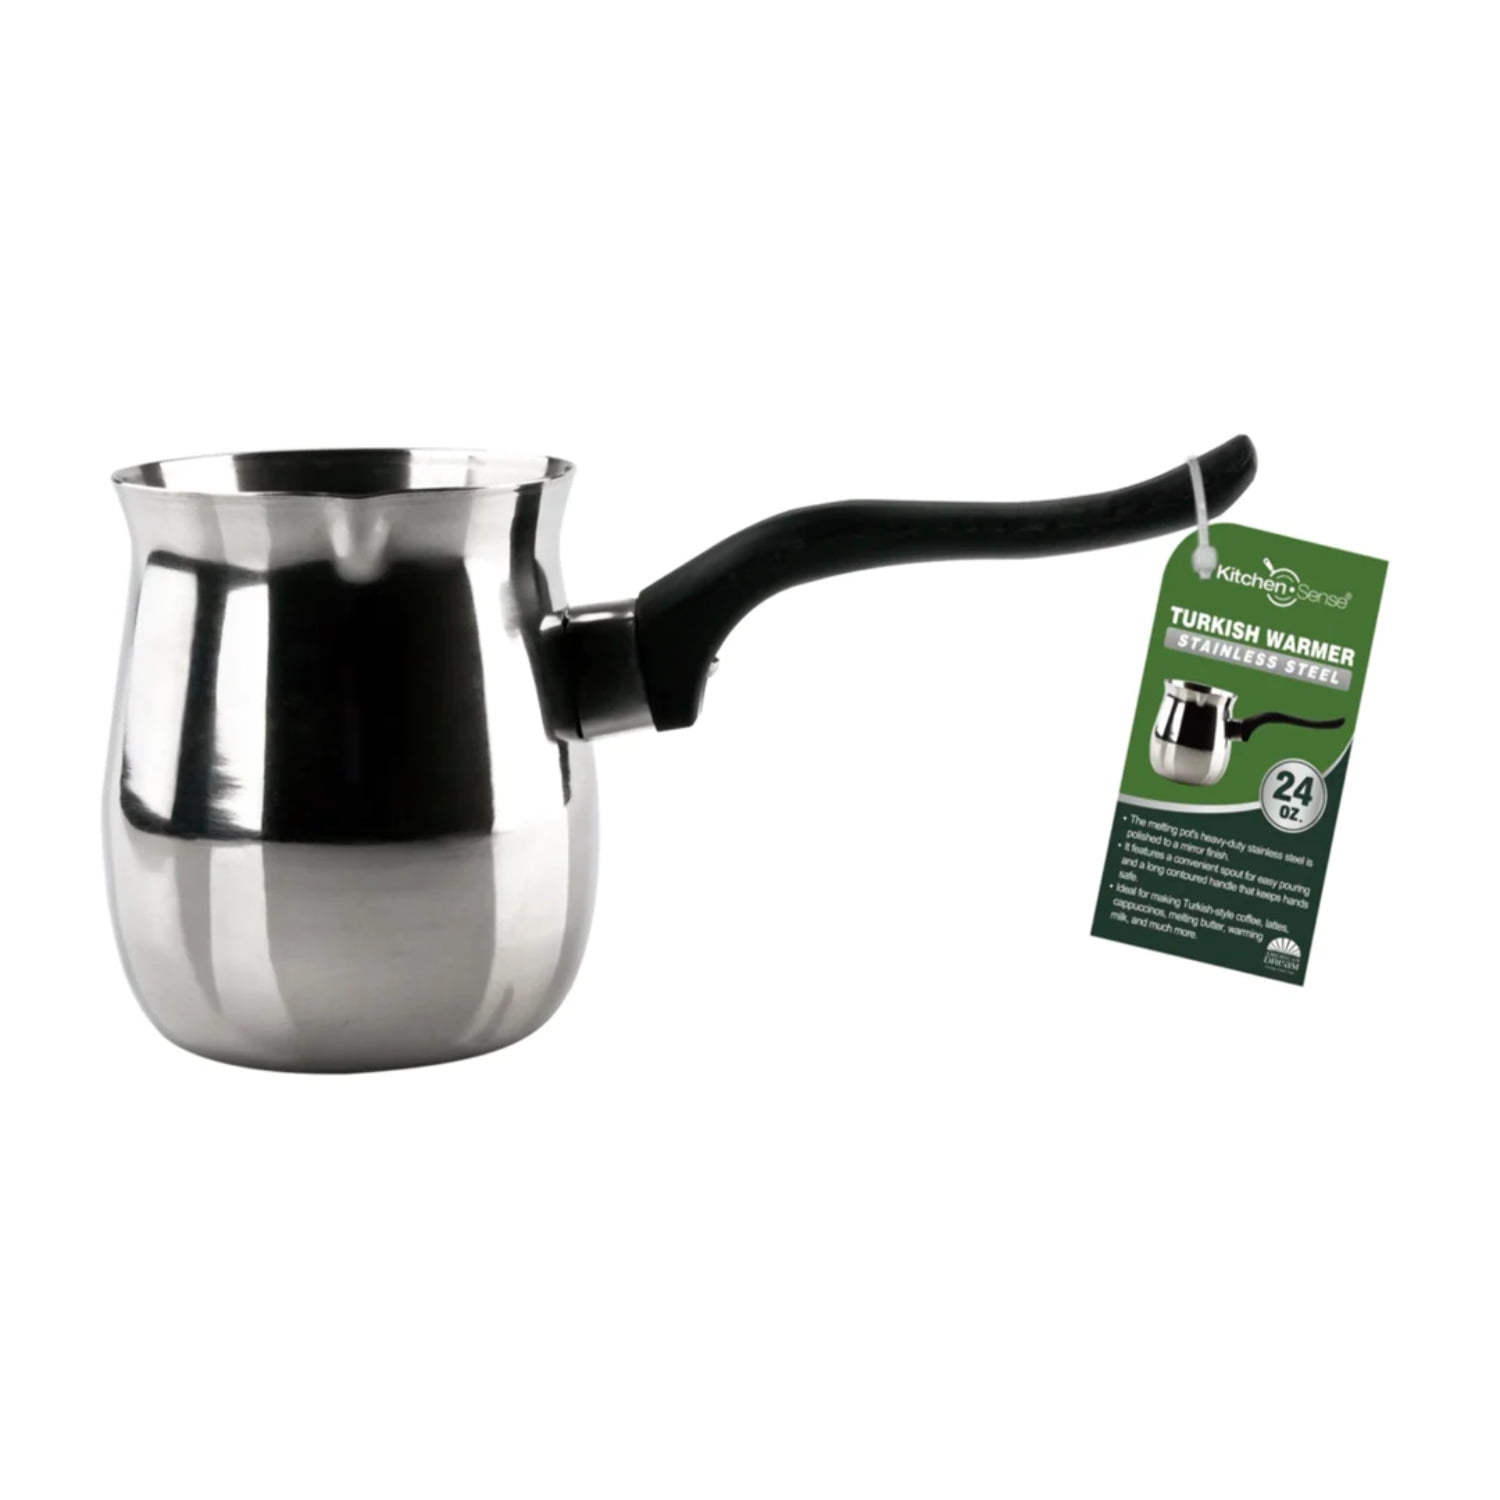 3-Piece Stainless Steel Coffee Warmer Set - Case of 24